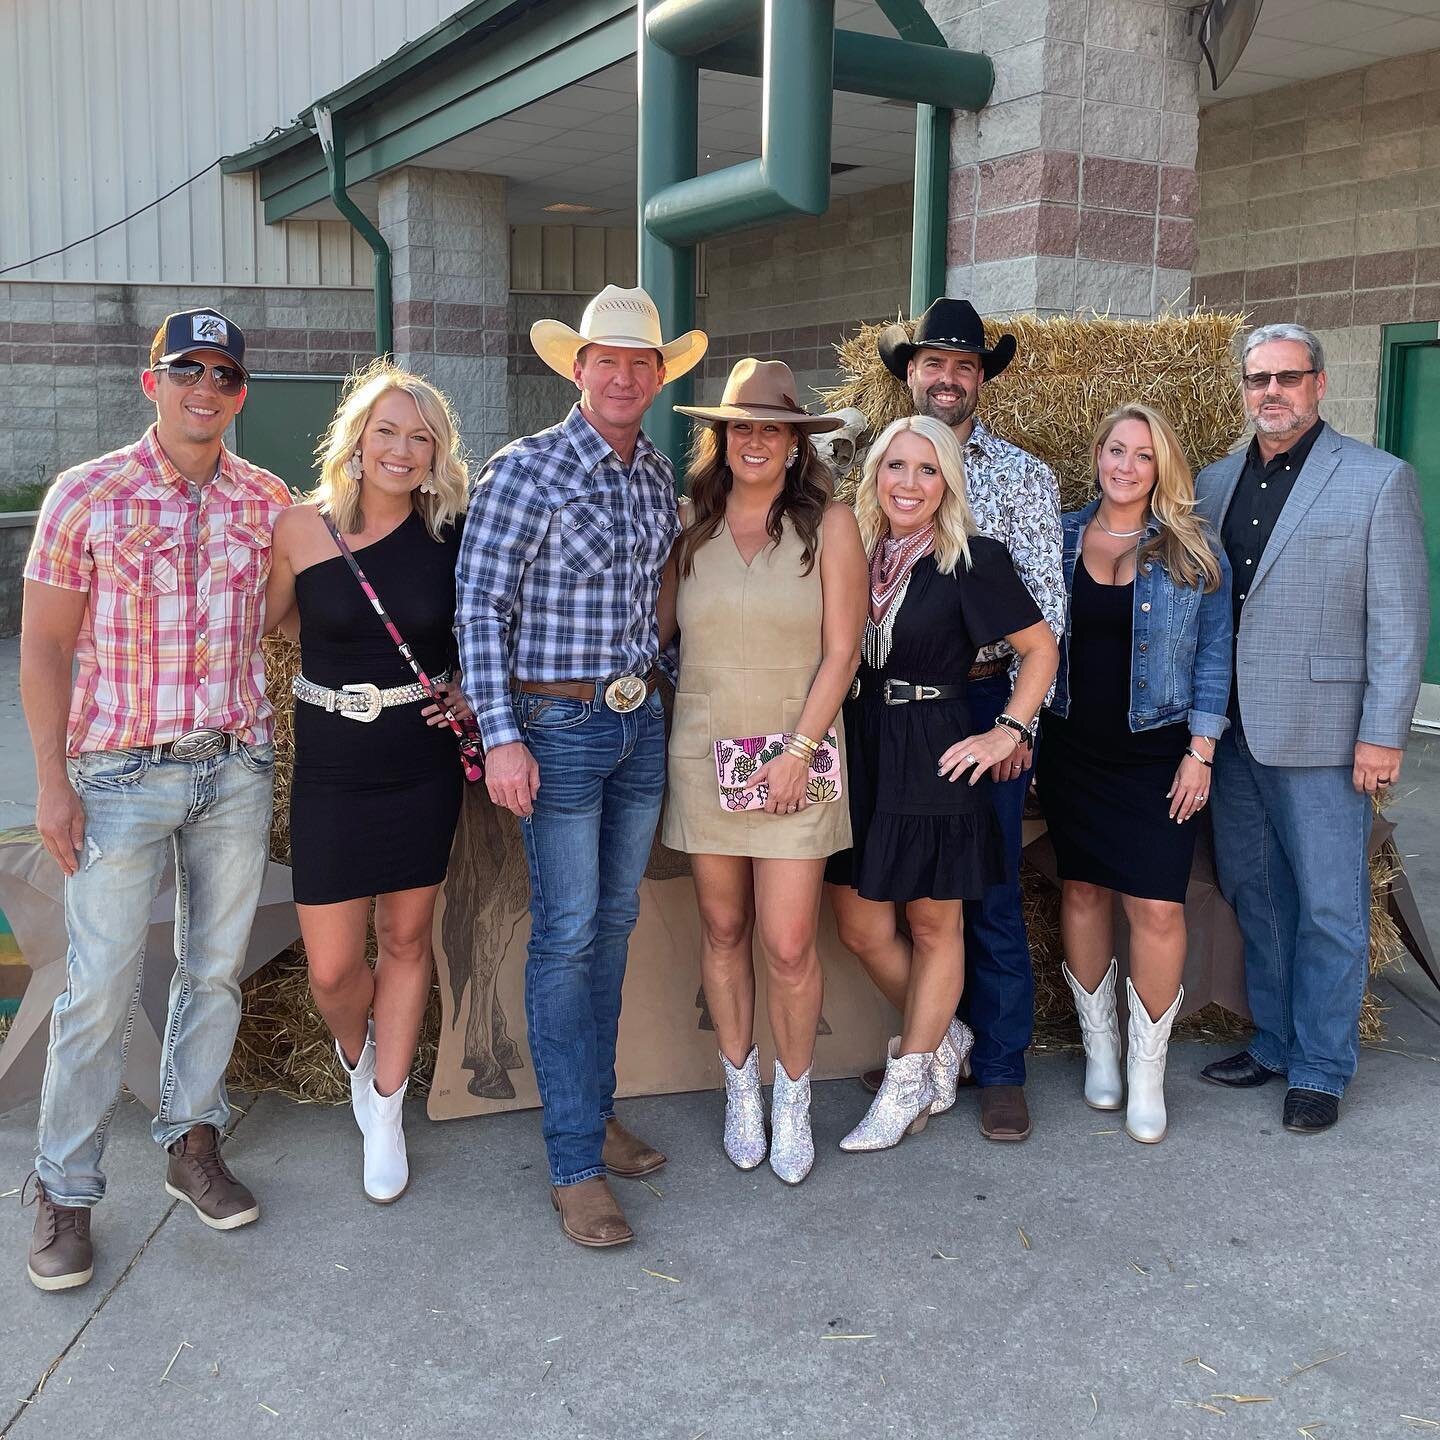 We were proud to show up &amp; support the @americancancersociety at the 2022 Cattle Baron&rsquo;s Ball of Southwest Missouri last night! What a fun event to raise money for a good cause. 🤠

#springfieldmo #americancancersociety #americancancersocie